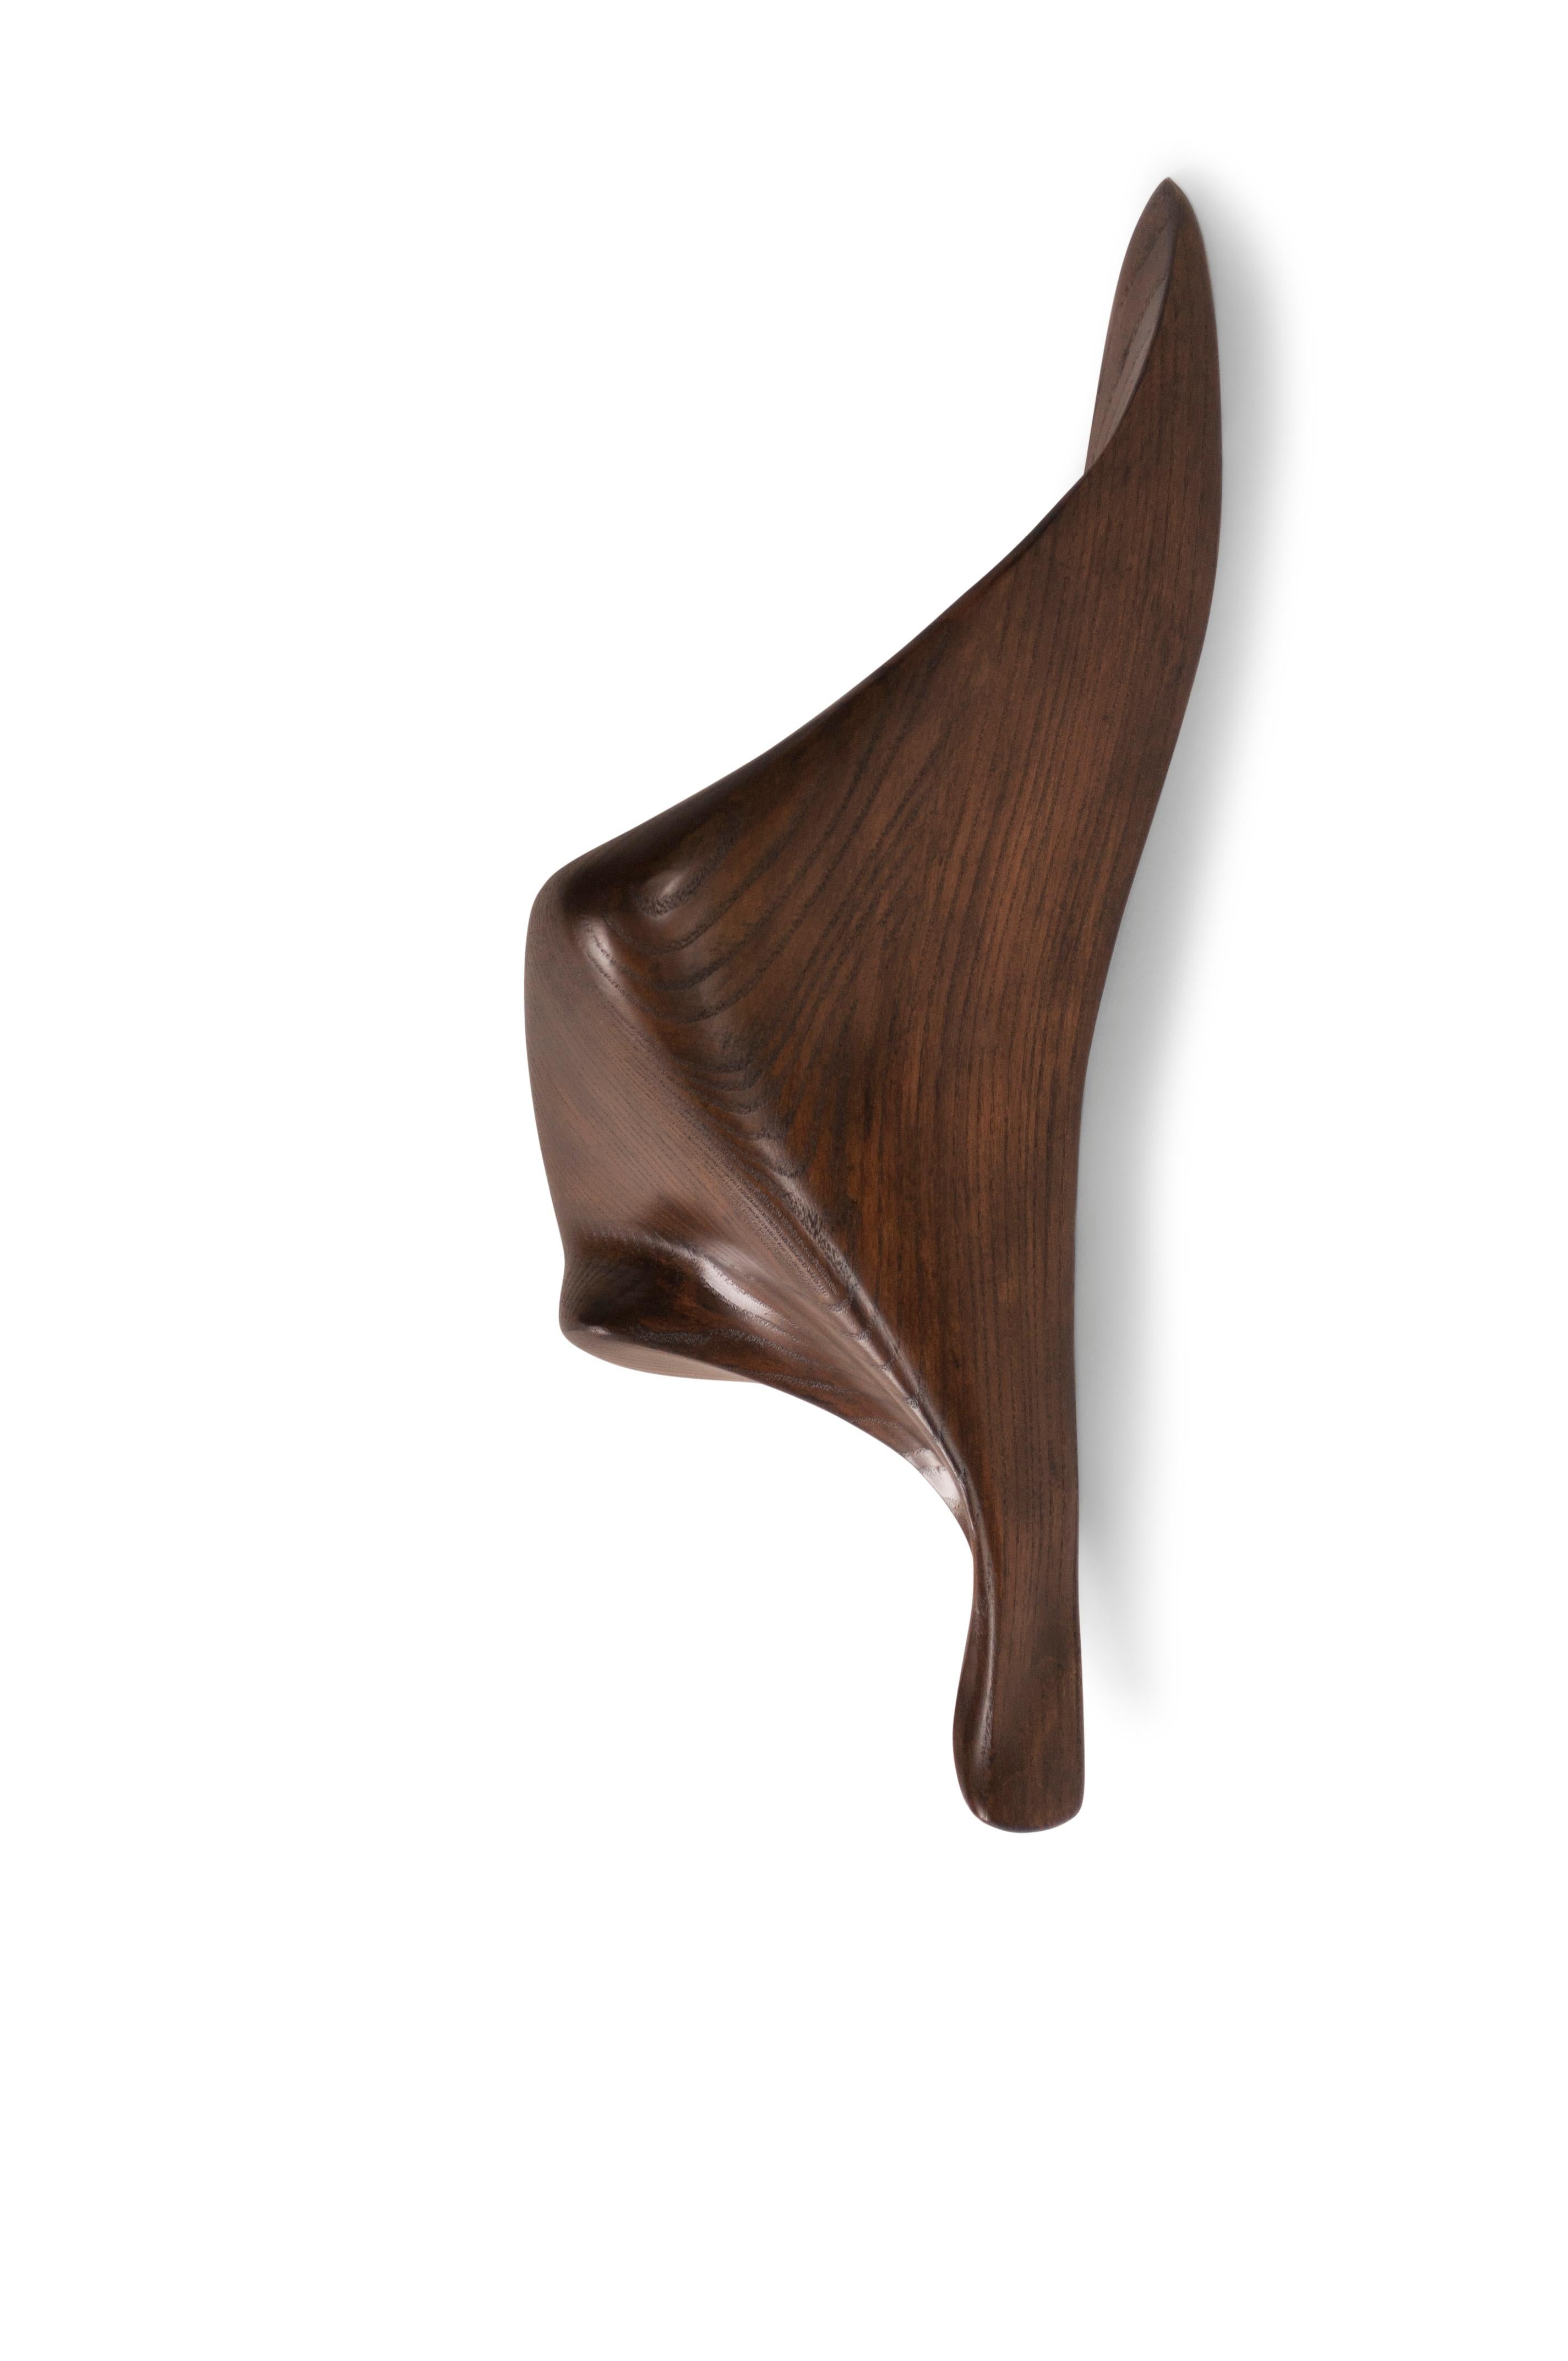 Carved Amorph Lustrous modern wall light in Graphite Walnut stain Ash wood Facing Right For Sale